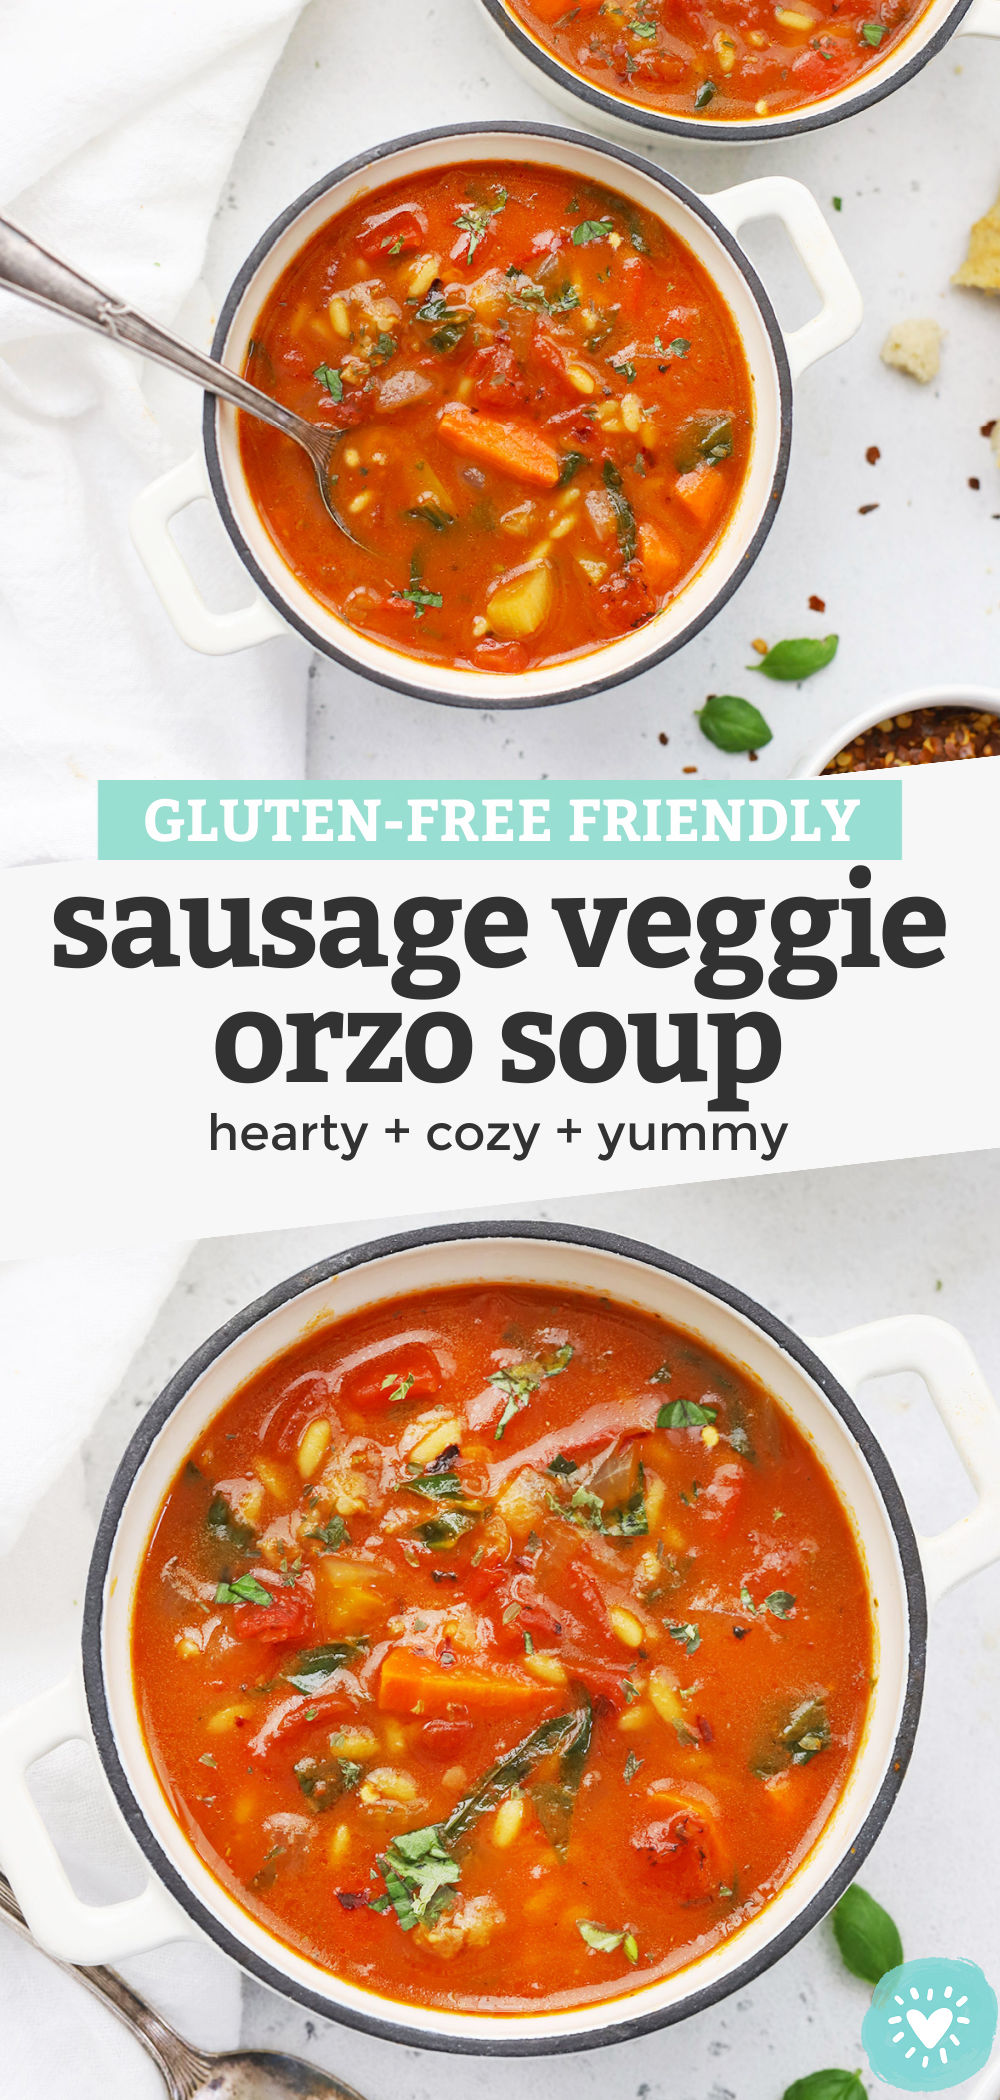 Sausage Orzo Soup - This Sausage Vegetable Orzo Soup is loaded with gorgeous Italian-inspired flavors and tender pasta. It's perfect for a cozy day! (Gluten-Free) // Orzo Veggie Soup // Sausage Veggie Orzo Soup Recipe // Gluten free Soup // Orzo recipe #orzo #soup #glutenfree